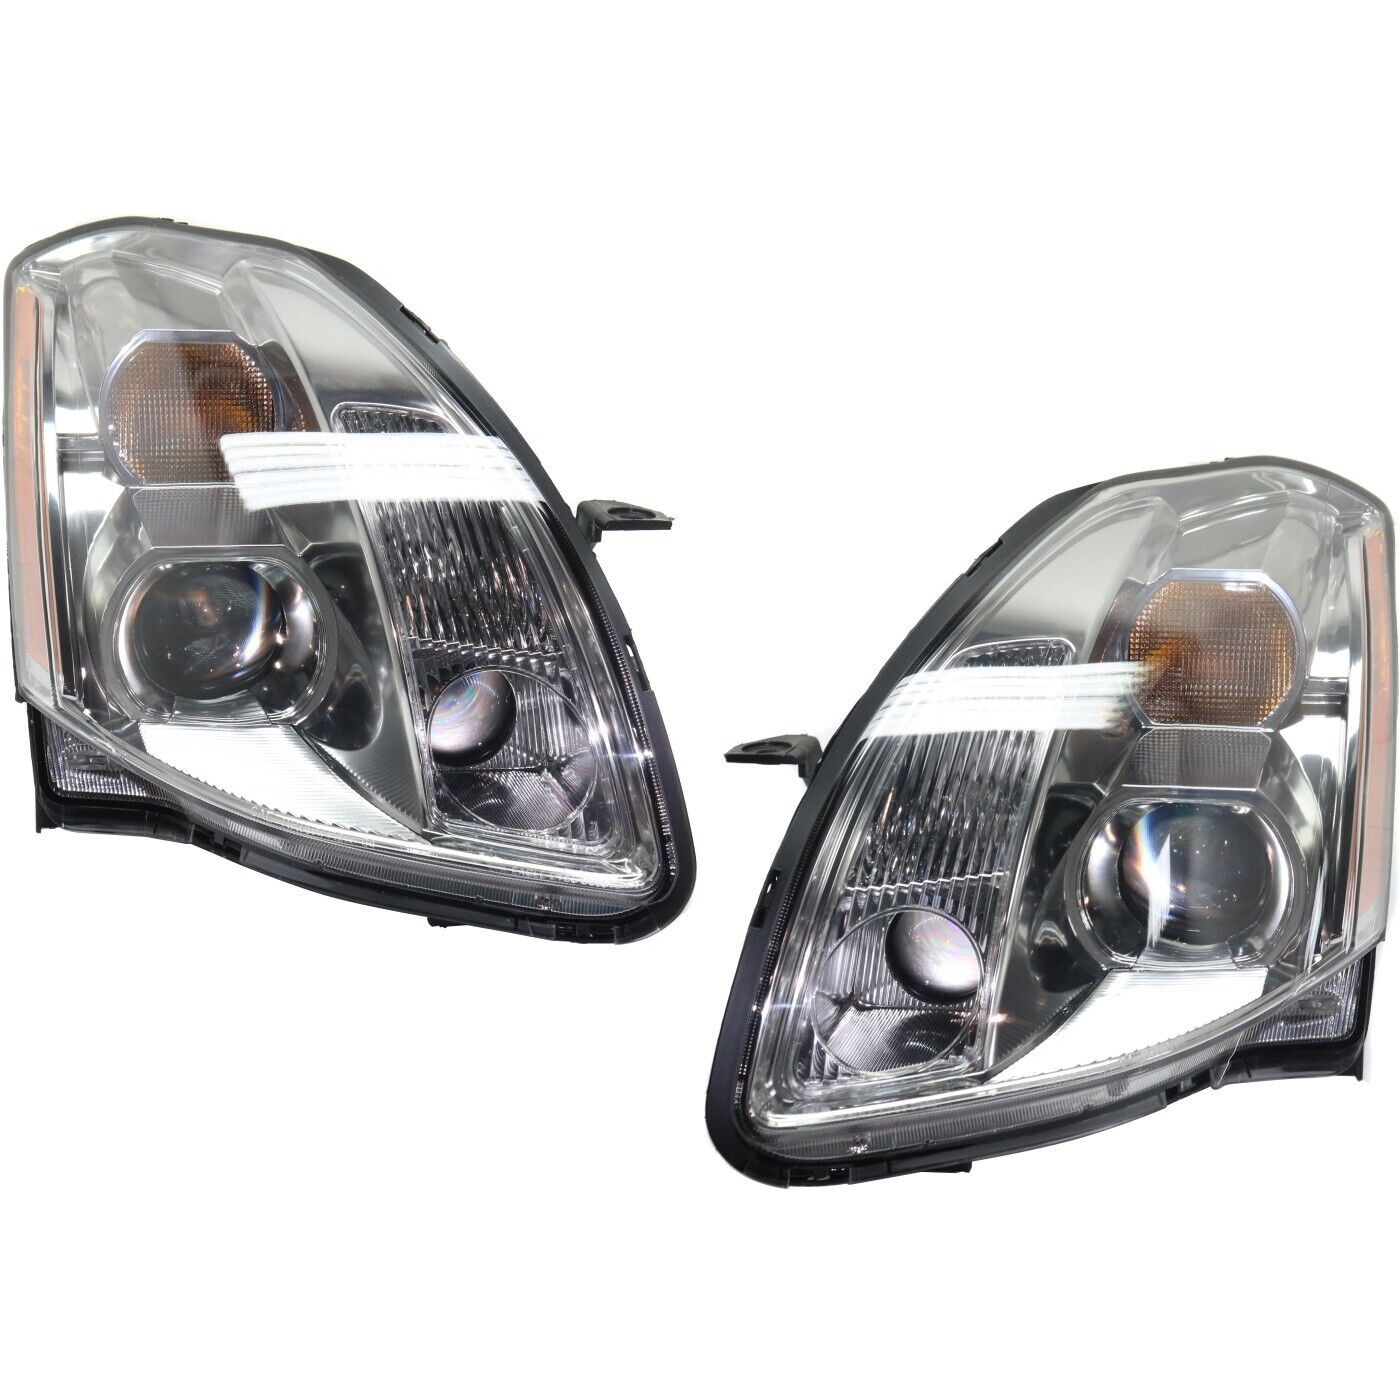 Headlight Set For 2005-2006 Nissan Maxima Left and Right With Bulb 2Pc